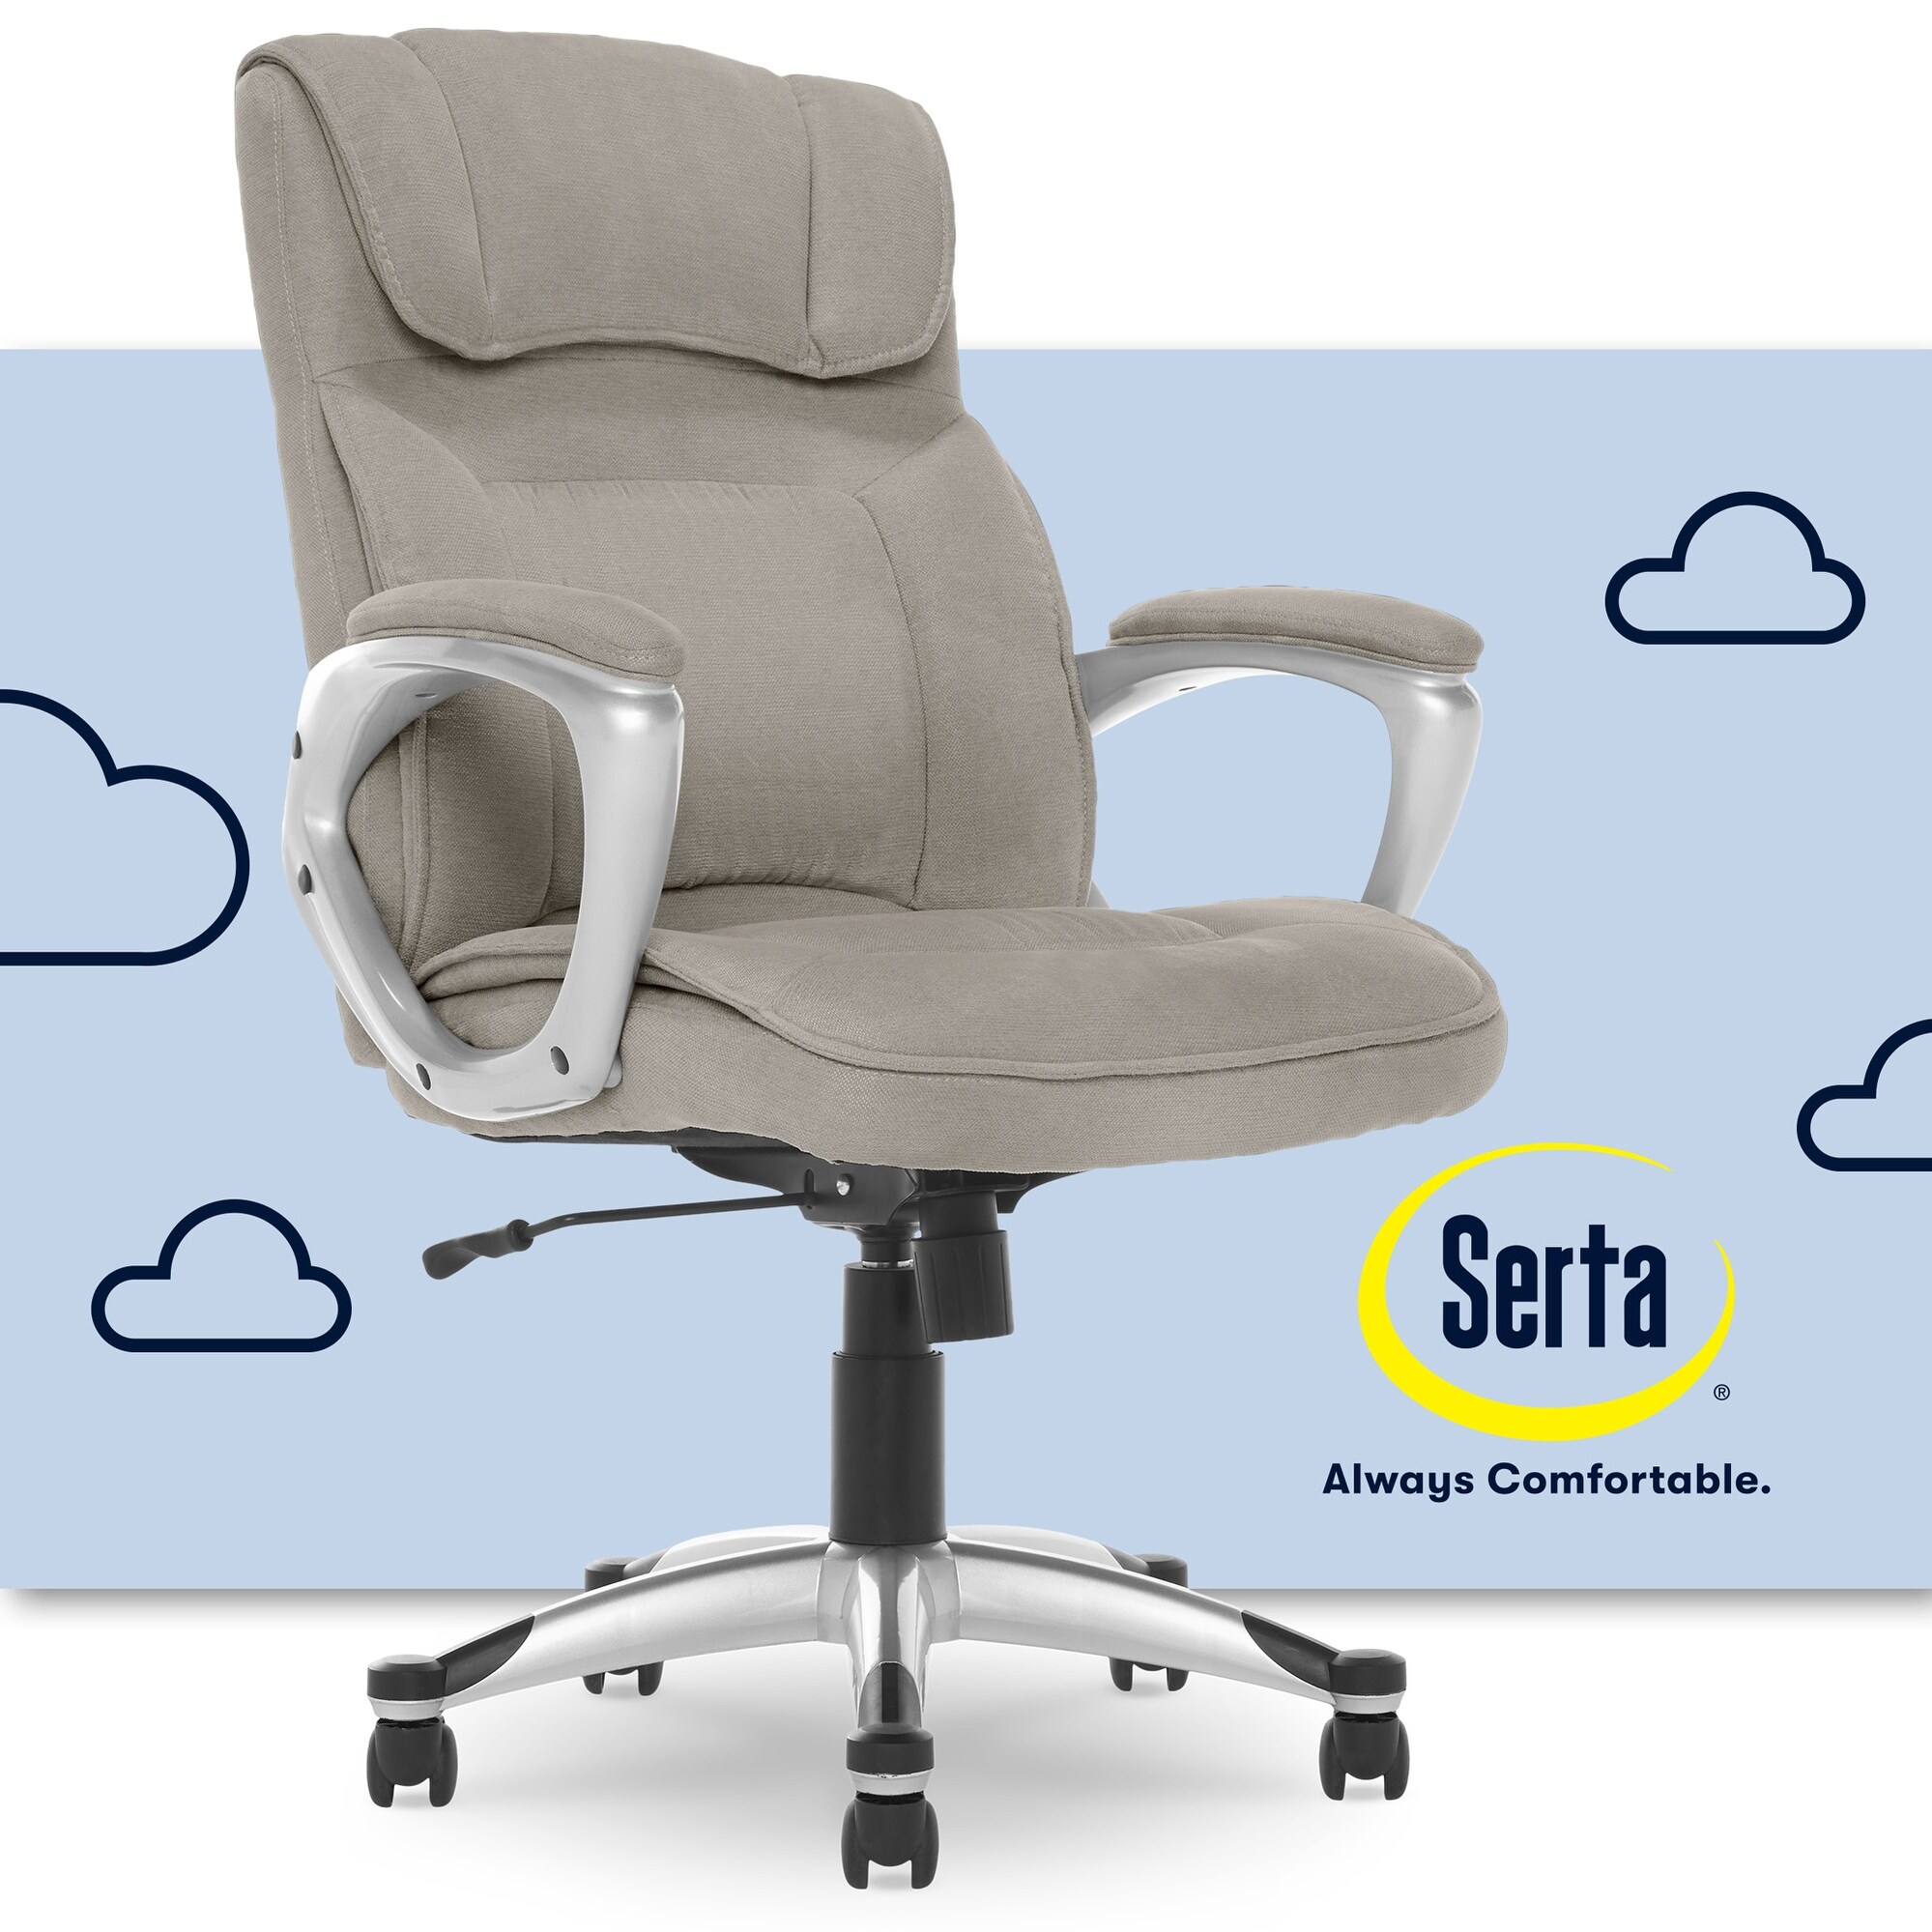 https://ak1.ostkcdn.com/images/products/is/images/direct/760a986ec804f5971646960778a17badaa70c352/Serta-Light-Coffee-Microfiber-Executive-Office-Chair.jpg